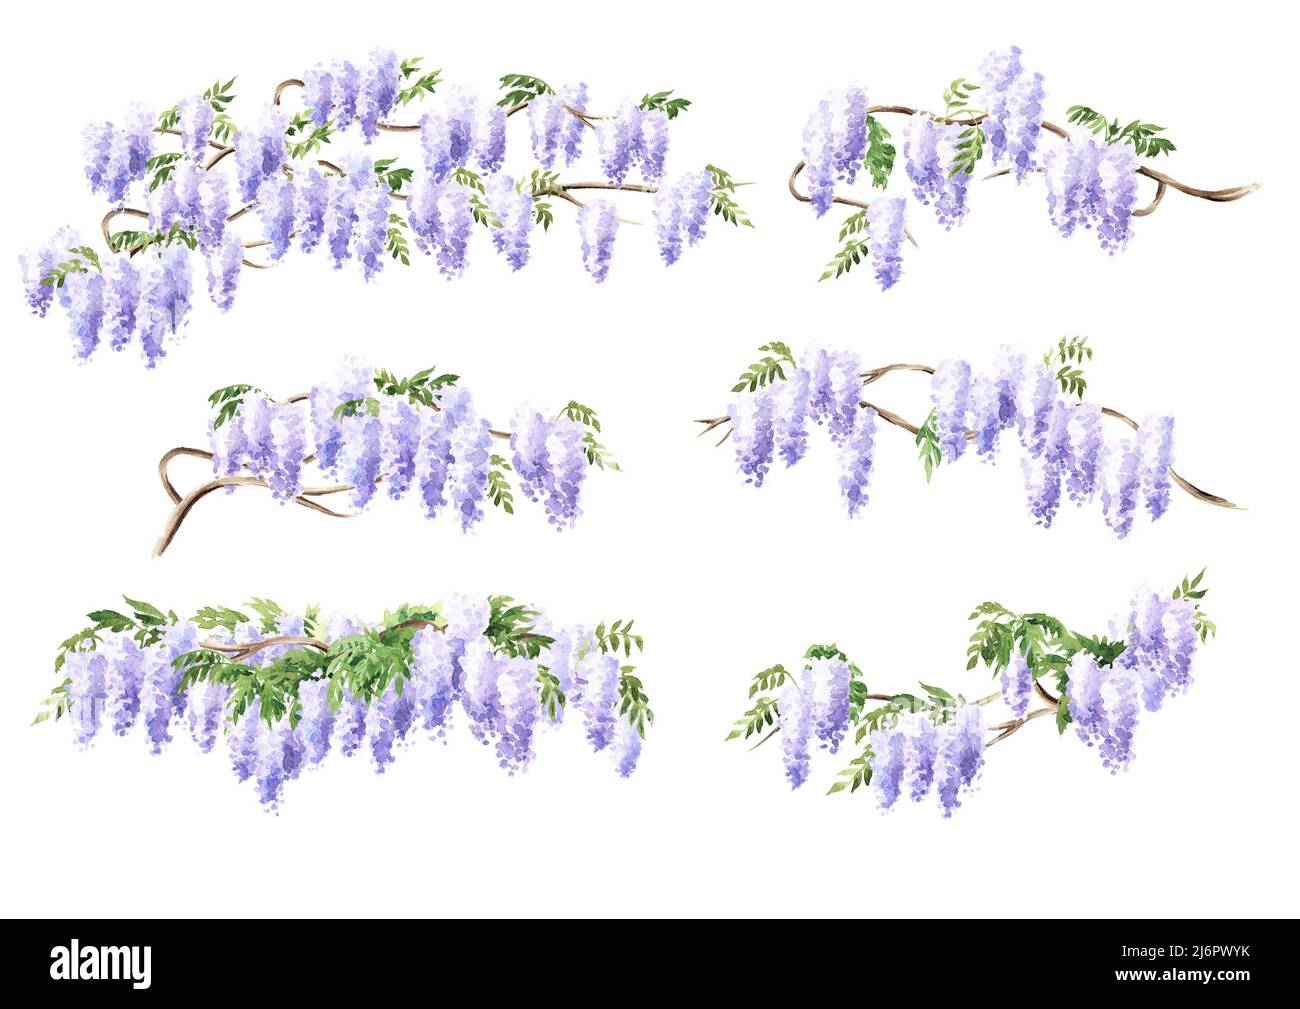 Wisteria blossom tree elements set.  Hand  drawn watercolor  illustration isolated on white background Stock Photo